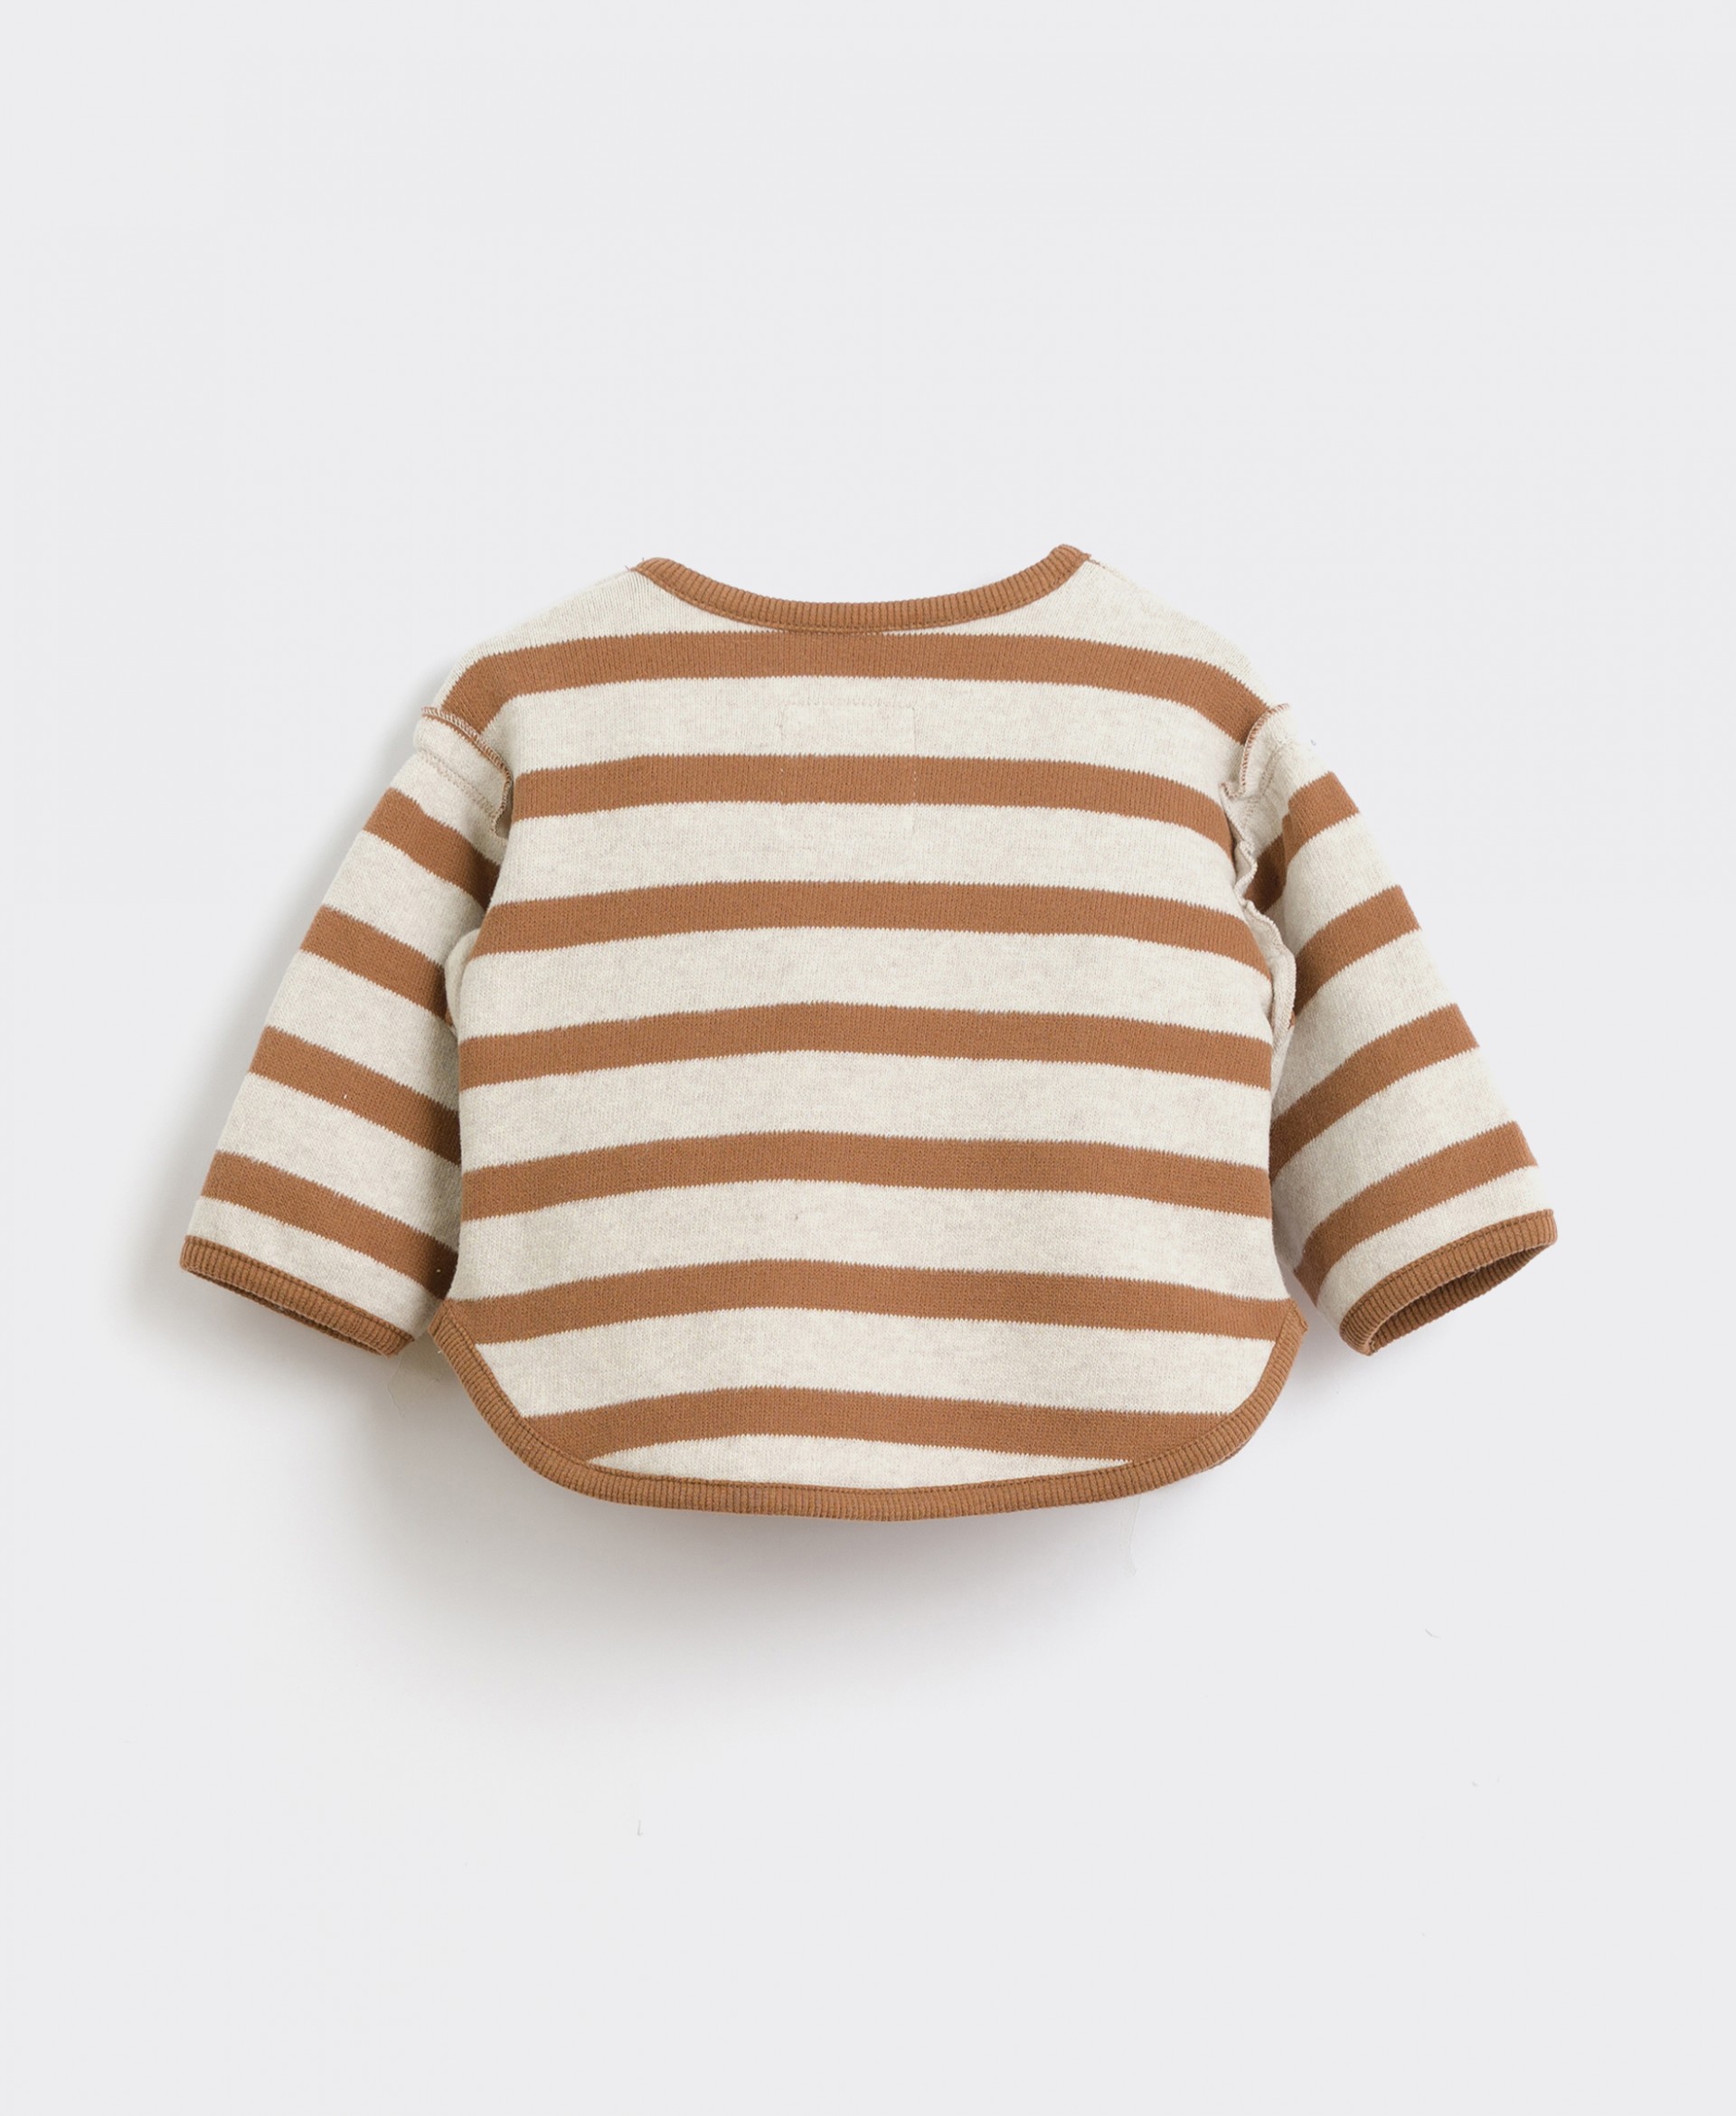 Striped jersey with frill on the sleeves | Culinary